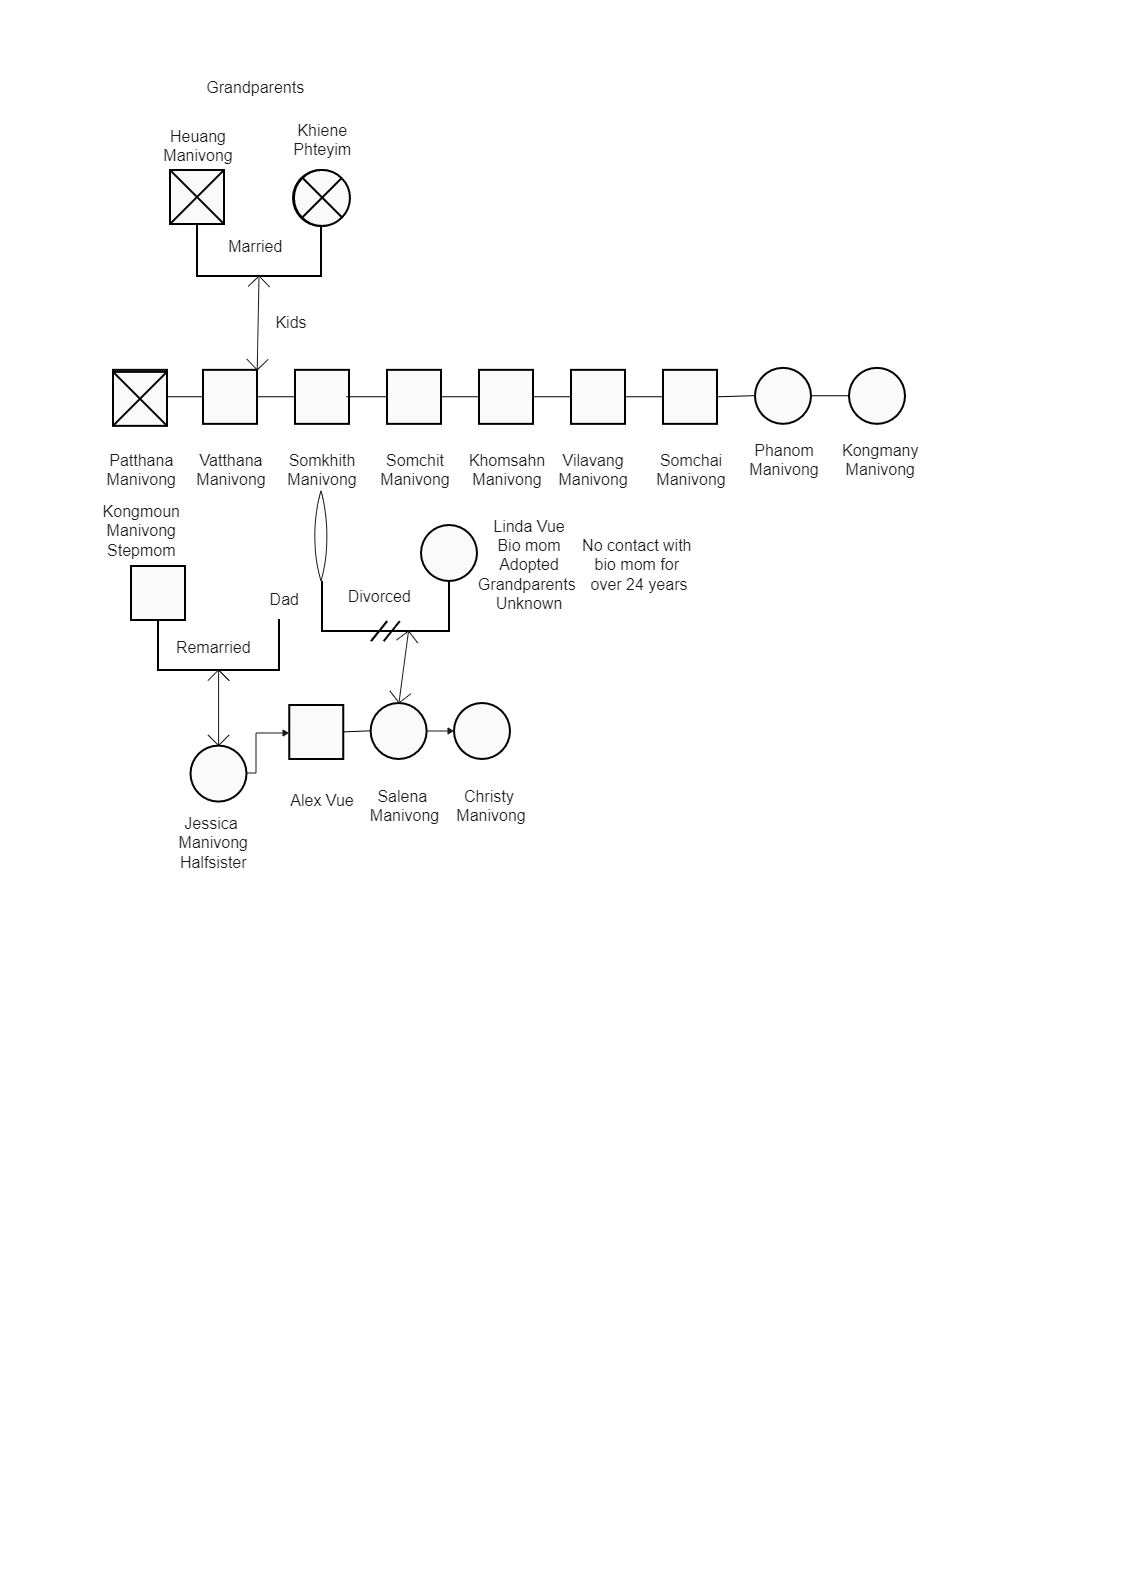 Here shows the Genogram treemap of Alex's family.  A genogram is a visual mapping tool that illustrates a person's family tree, relationships, and history. It is more than the traditional family tree giving insights into the medical history and behaviors